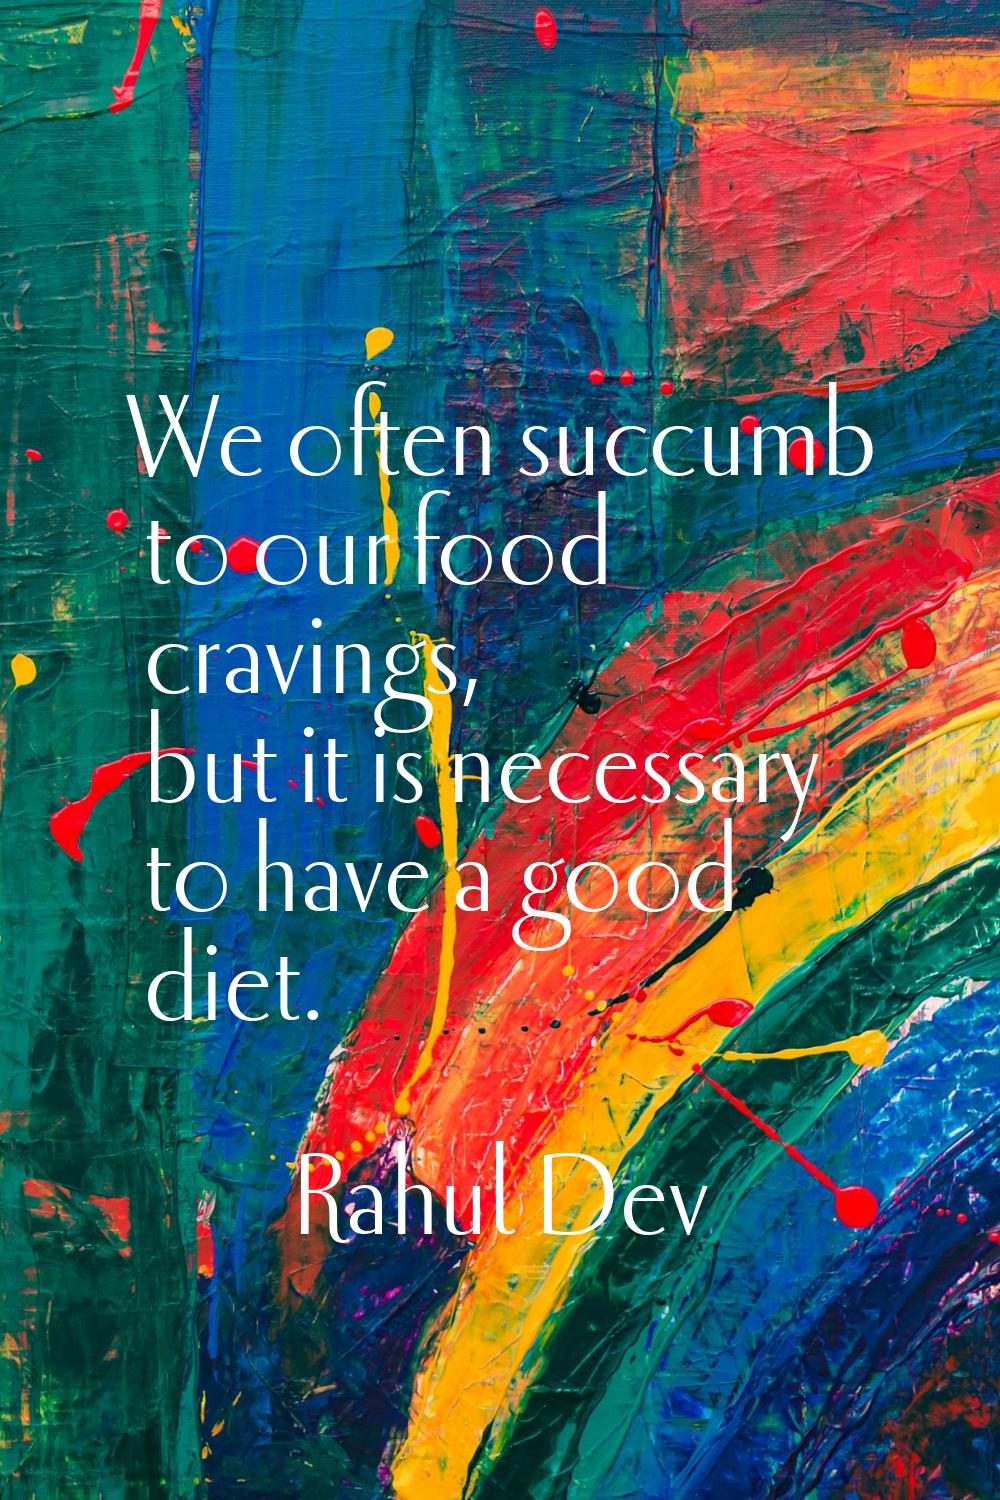 We often succumb to our food cravings, but it is necessary to have a good diet.